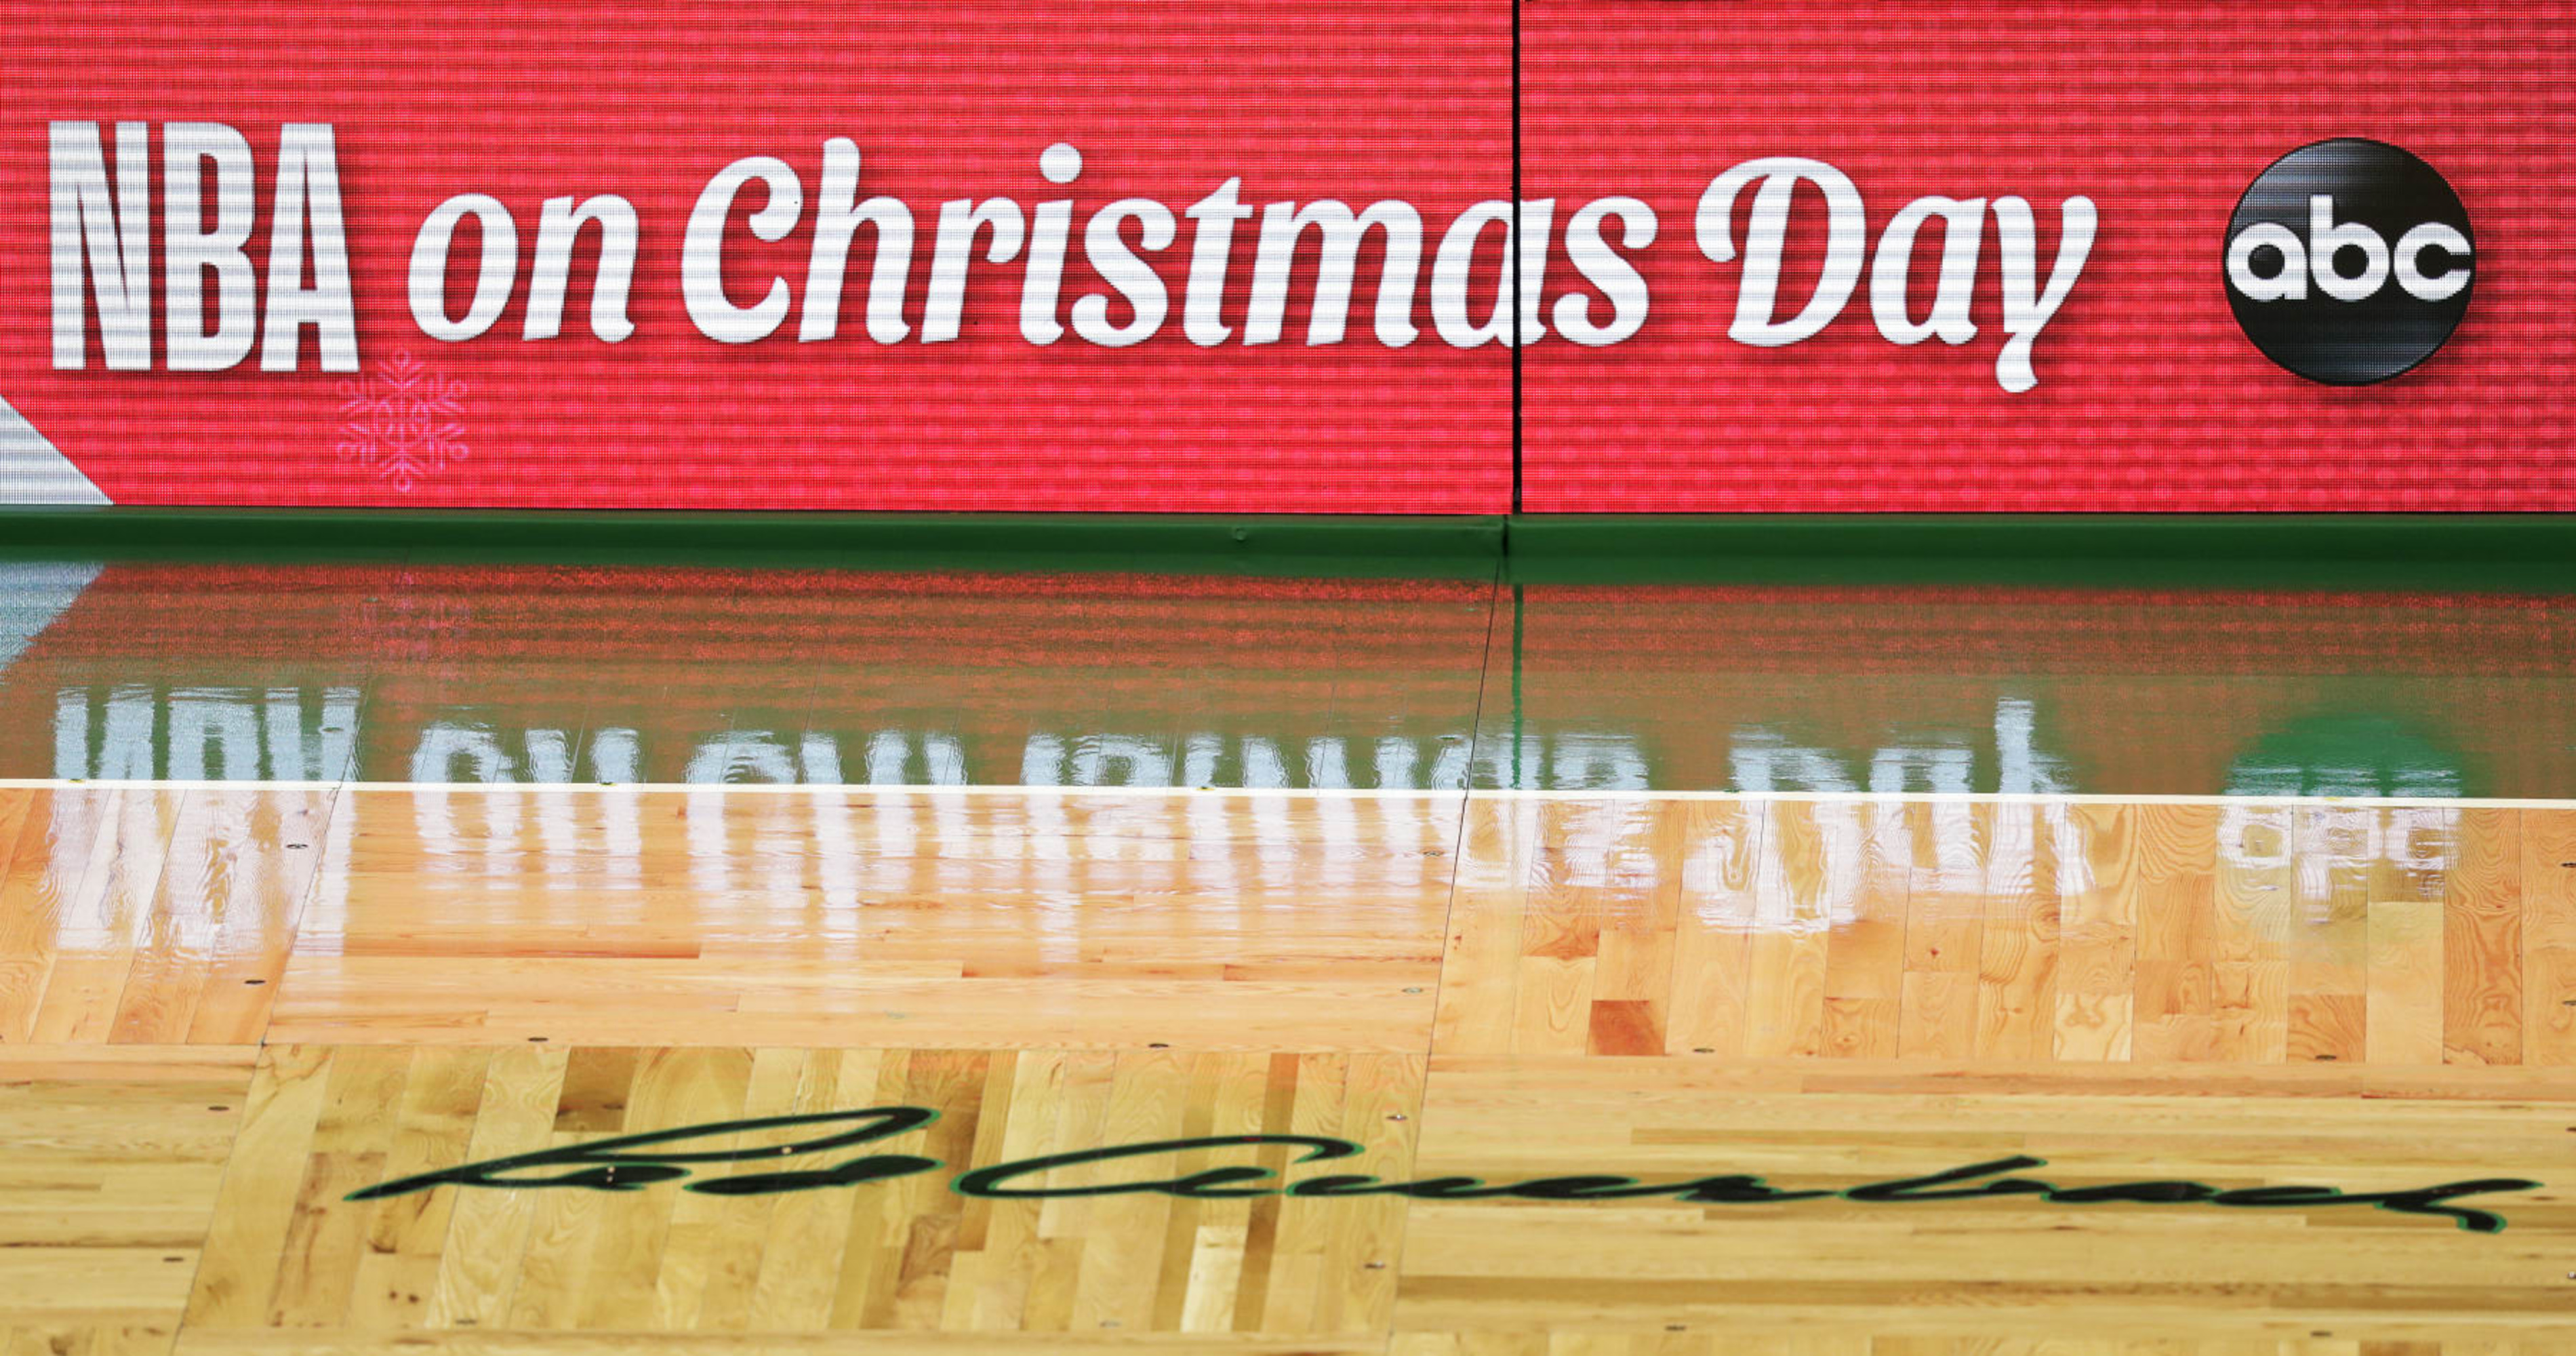 Lakers Christmas Day opponent for 2023 revealed by schedule leak